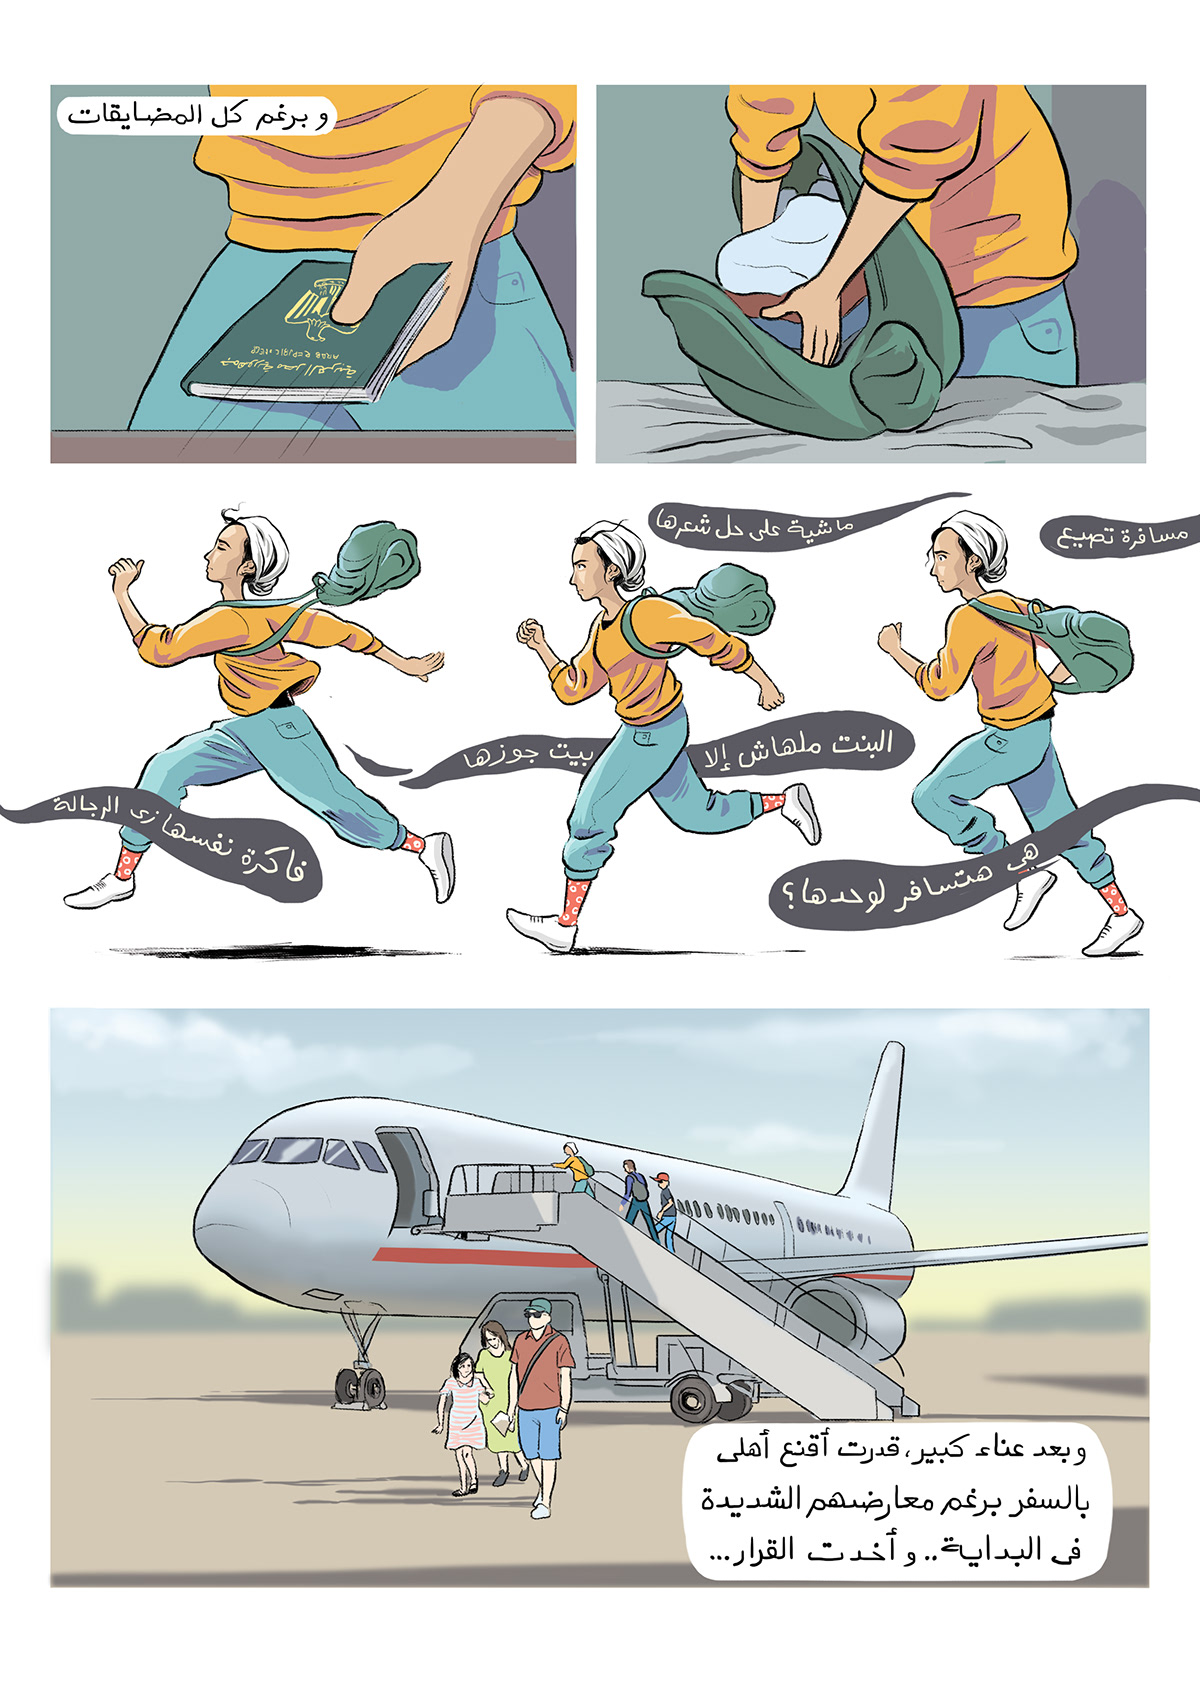 comics Empower Women freedom Gender equality ILLUSTRATION  She can struggle Travel traveling women rights